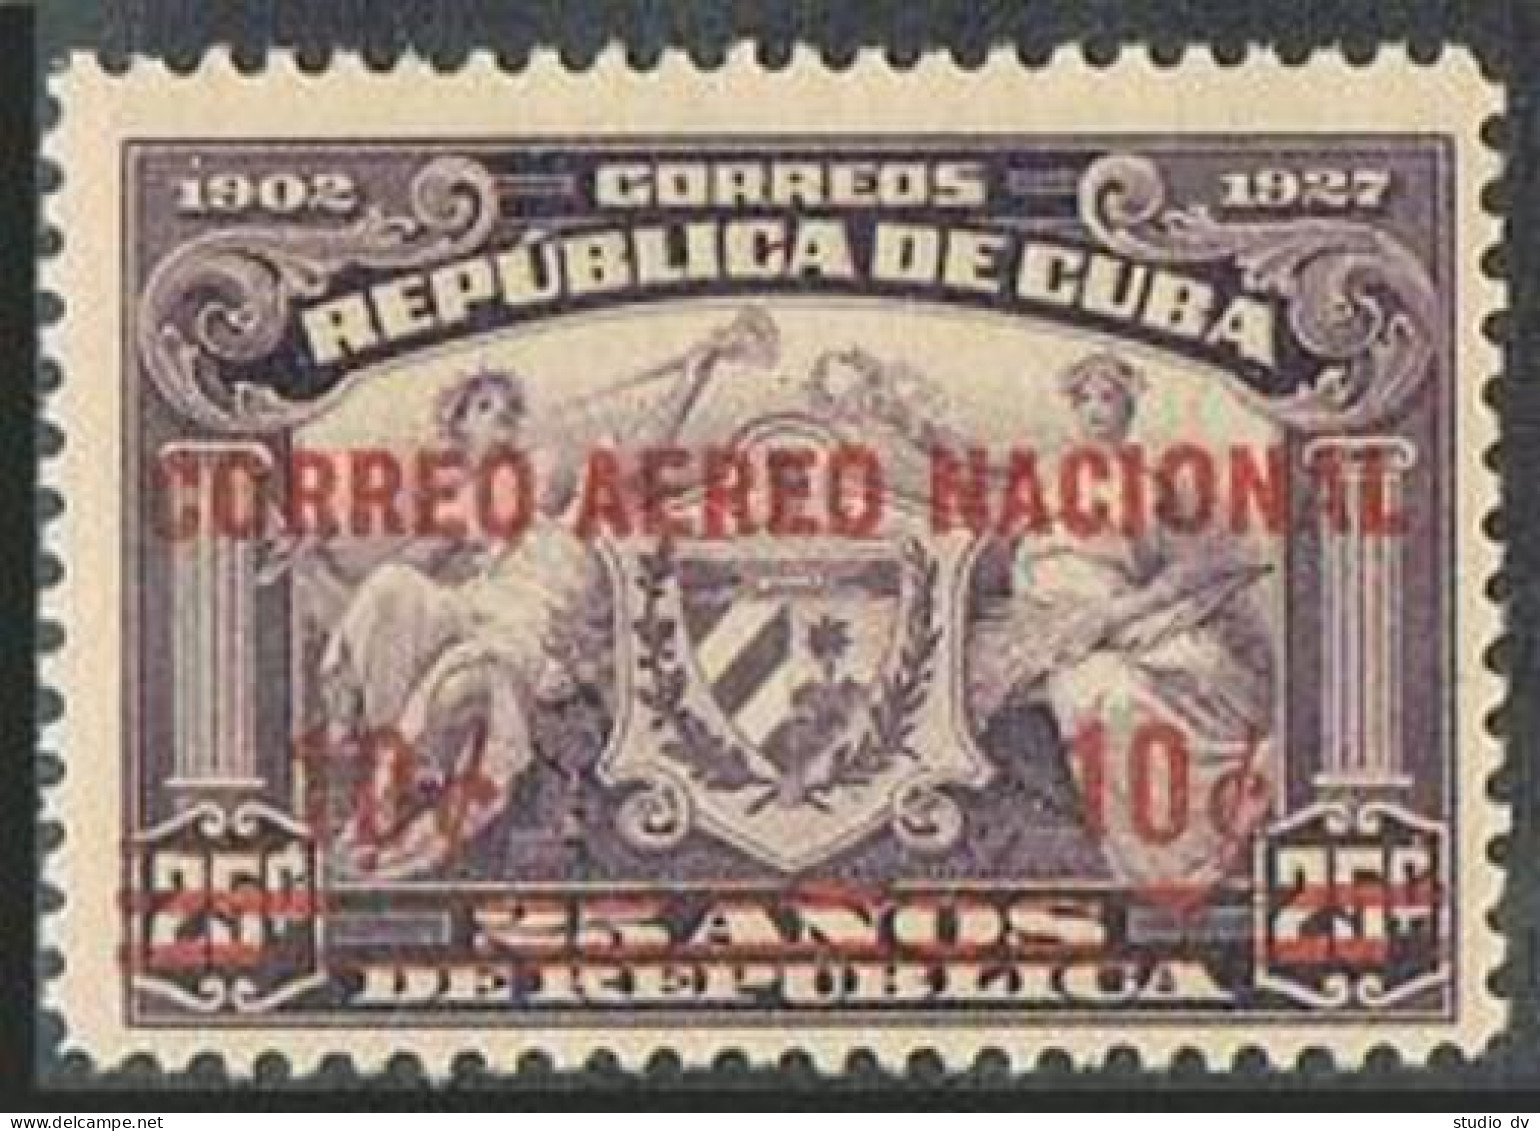 Cuba C3,MNH.Michel 79. Air Post 1930.Surcharged In Red CORREO AEREO NATIONAL. - Unused Stamps